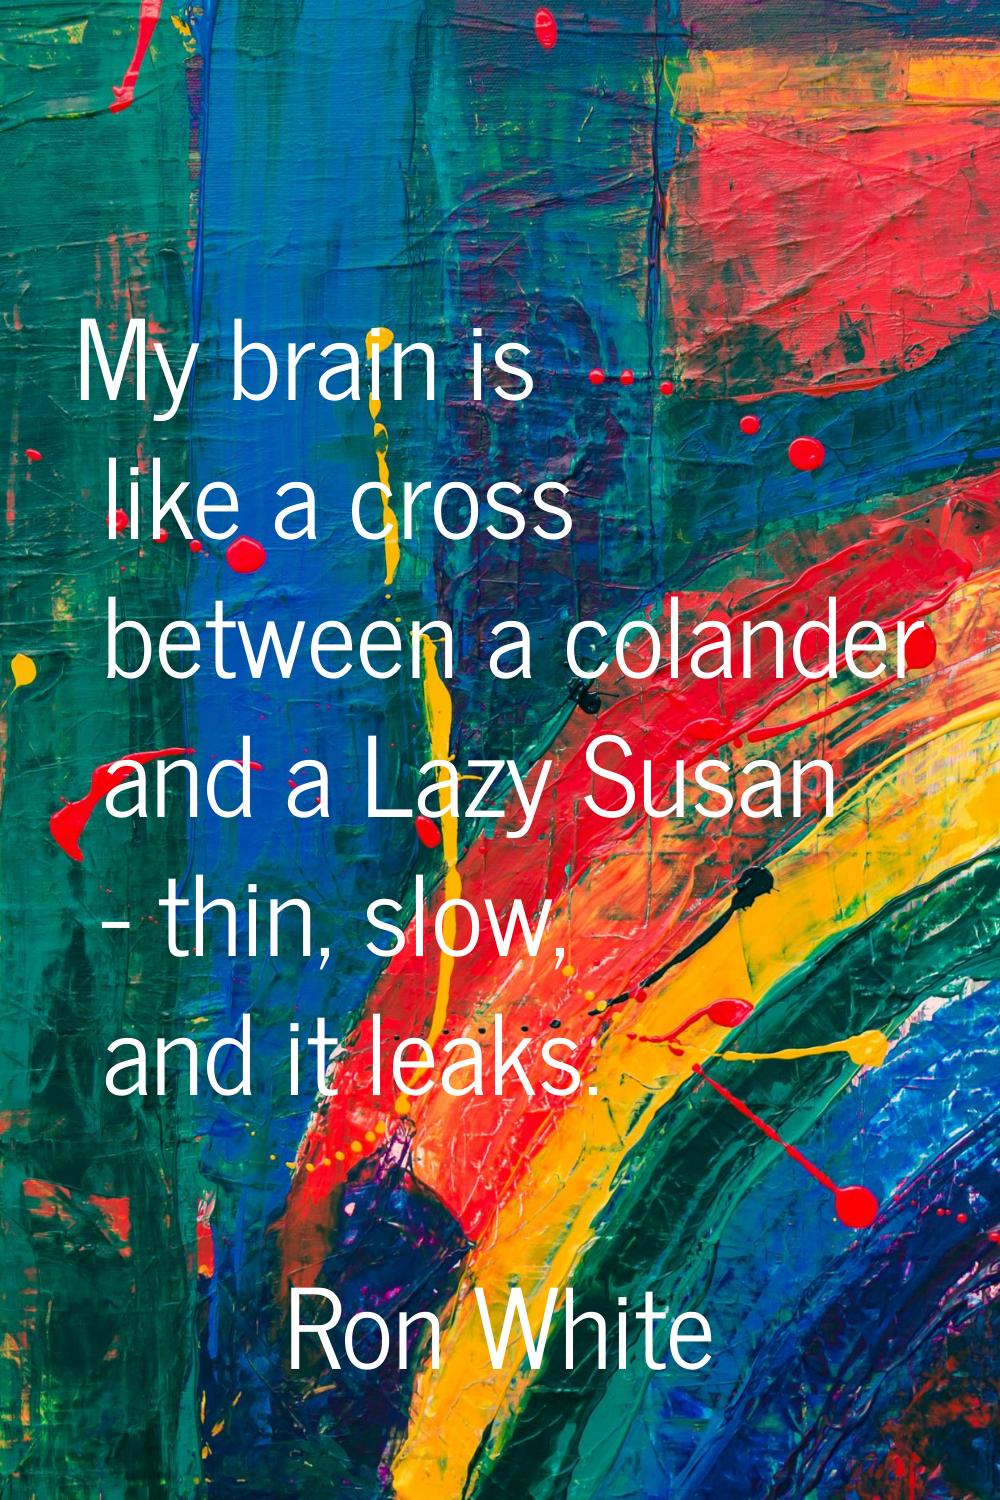 My brain is like a cross between a colander and a Lazy Susan - thin, slow, and it leaks.